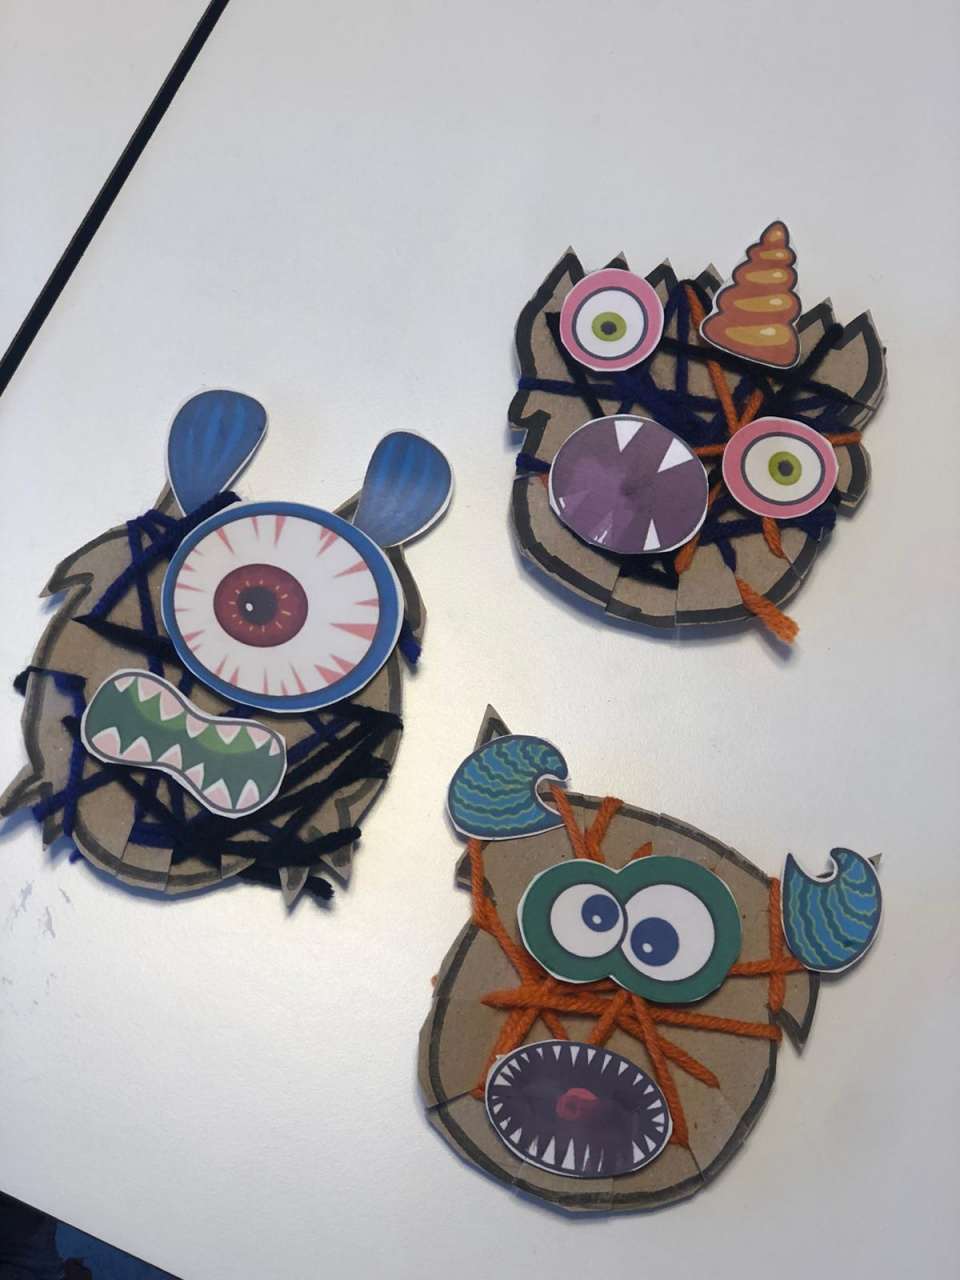 Wrapped with black, orange and purple yarn and created funny Monsters for Halloween